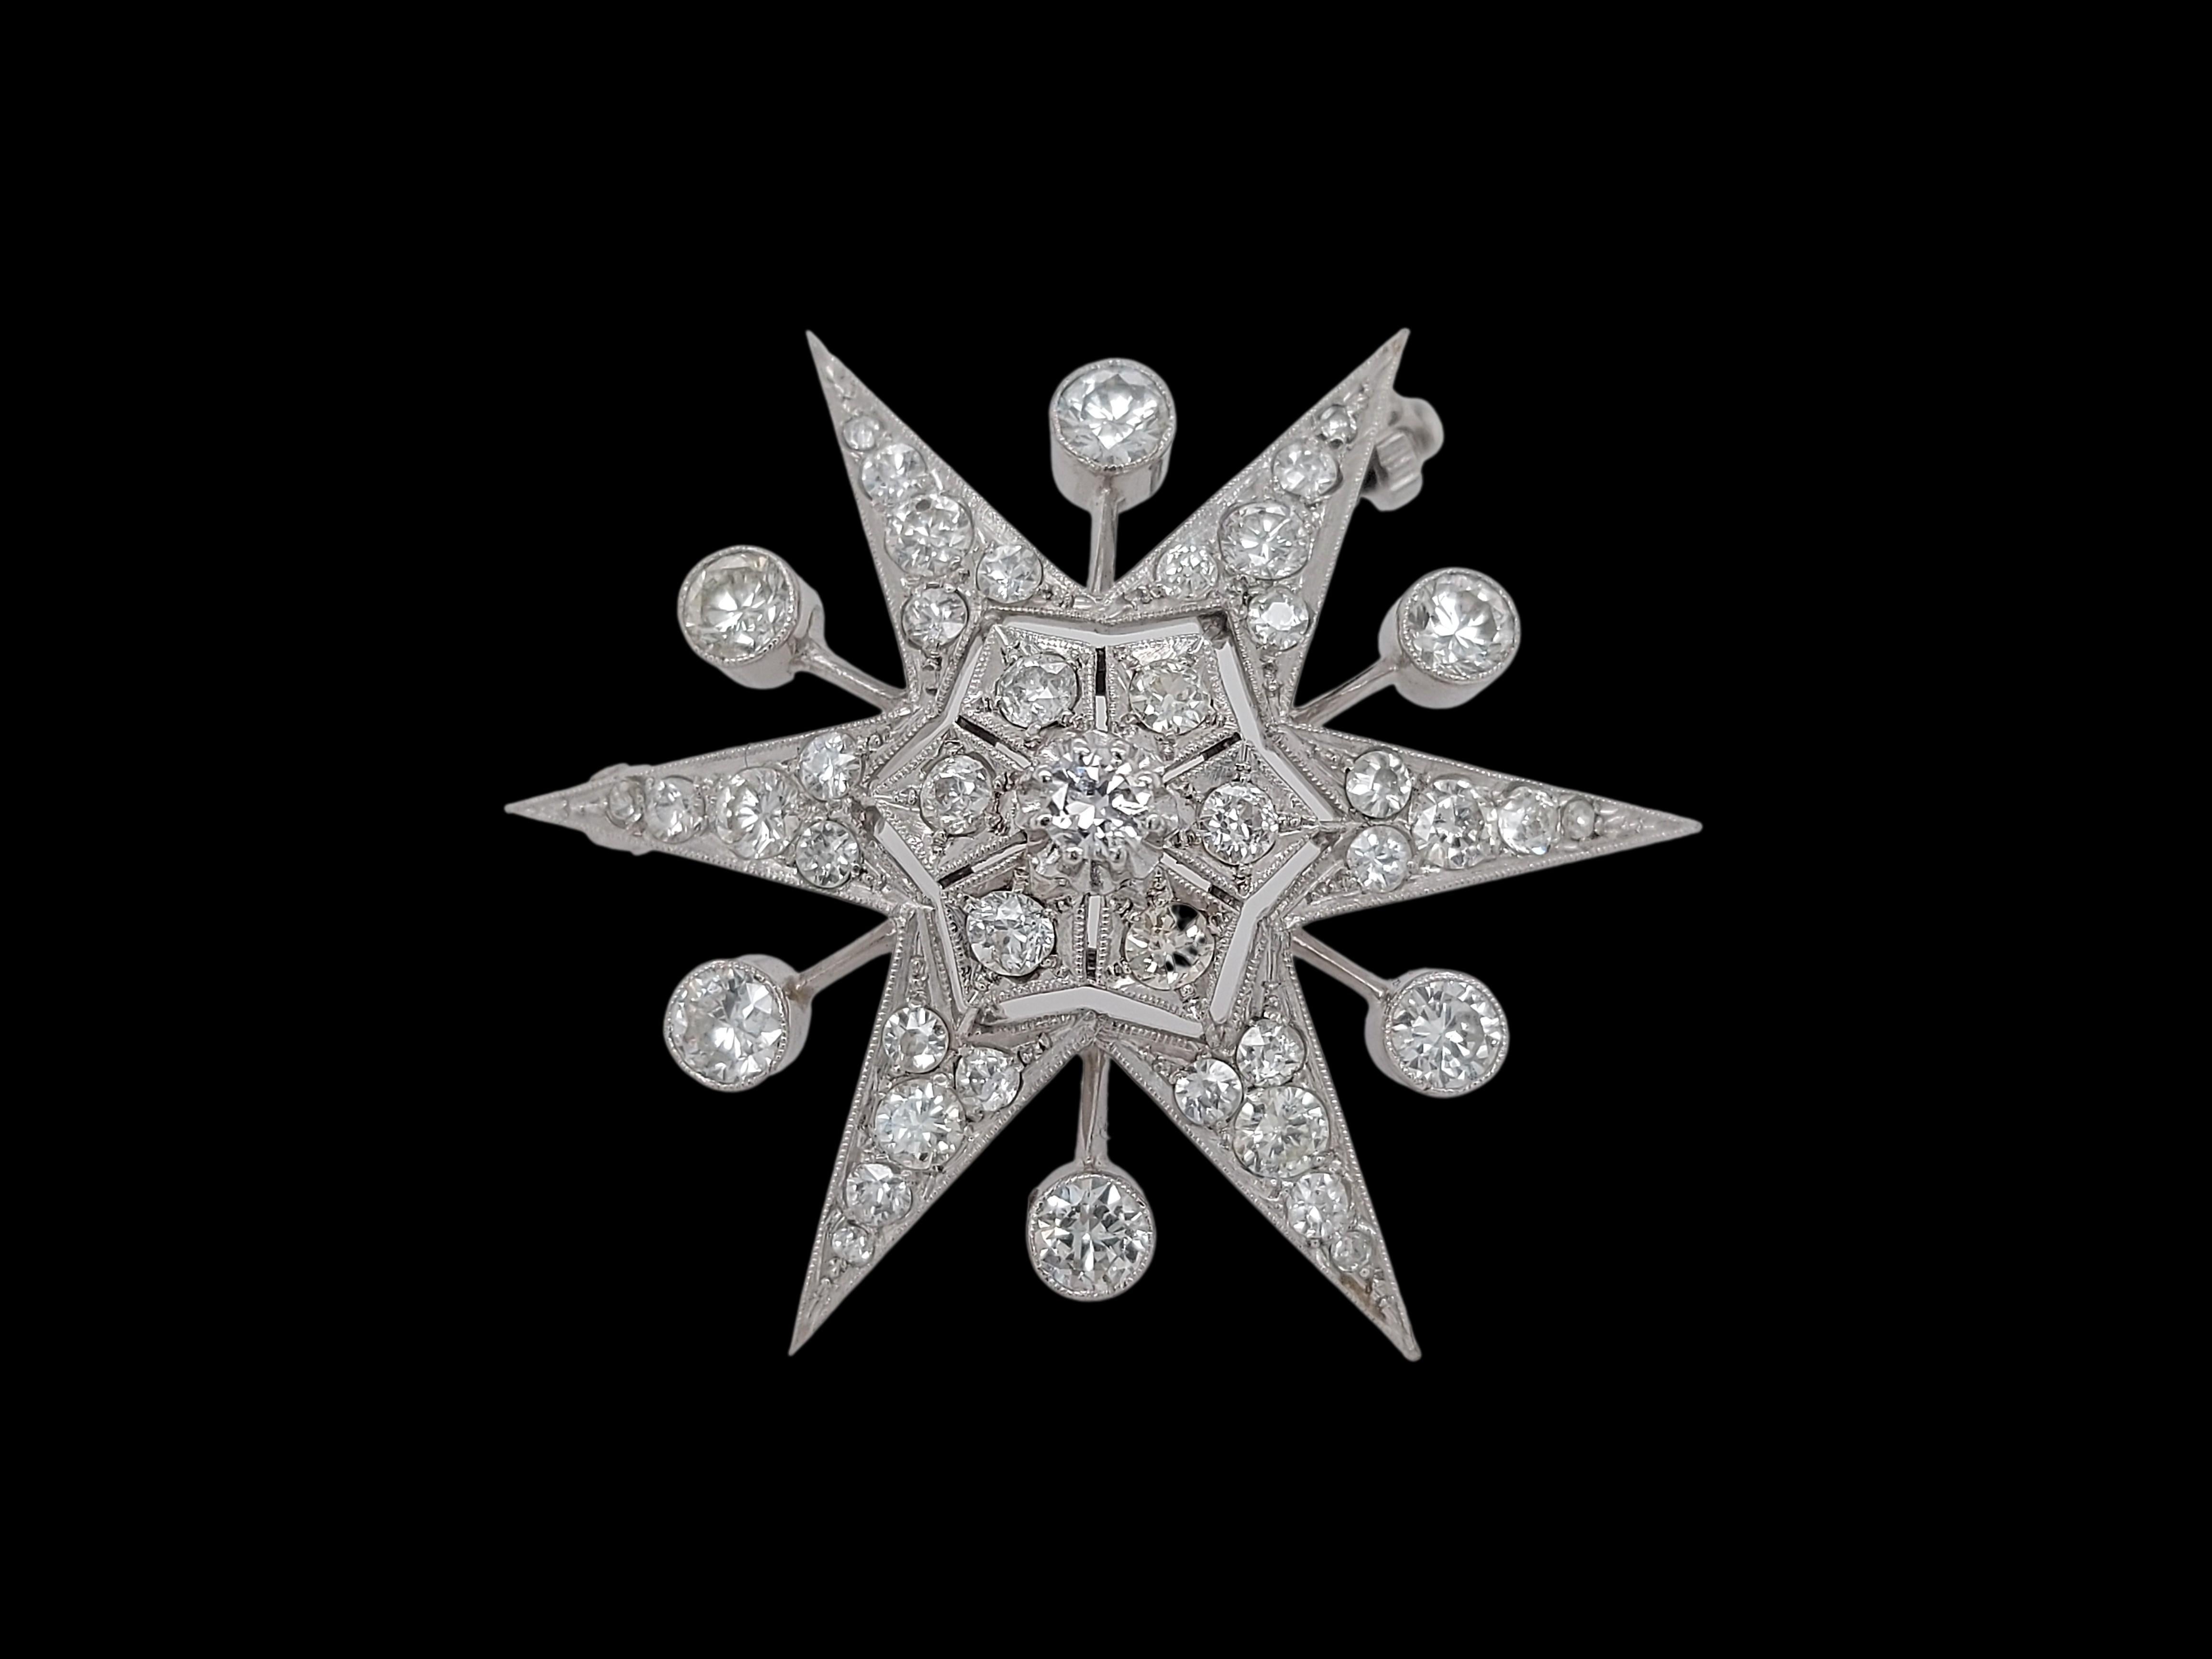 18kt White Gold Star Shape Brooch/Pendant with 3.8ct Diamonds 2